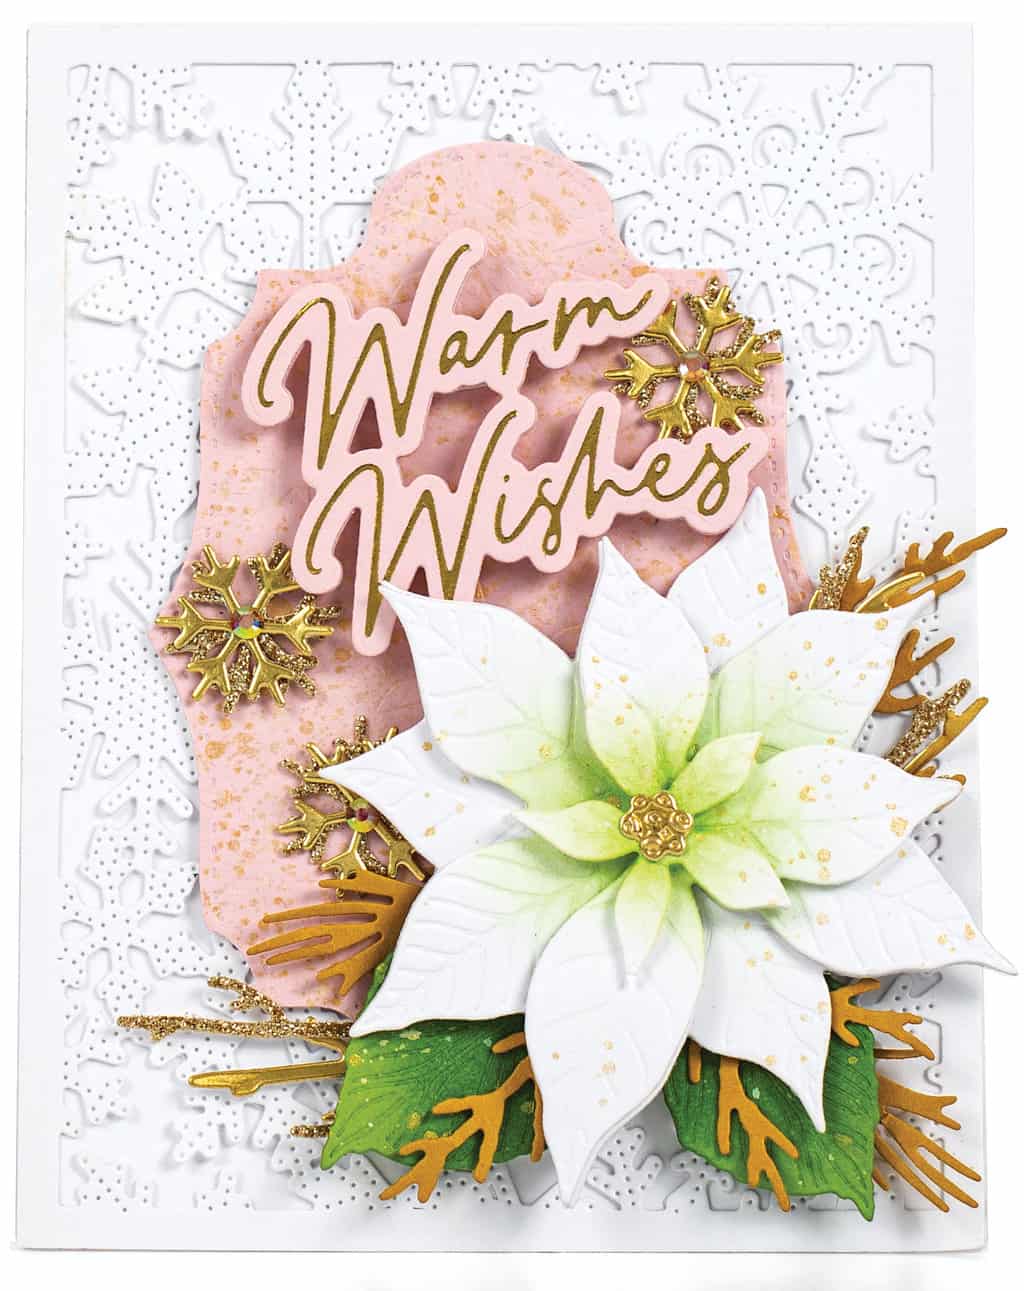 Warm Wishes card by Dilay Nacar | Scrapbook & Cards Today magazine Winter 2023 Issue